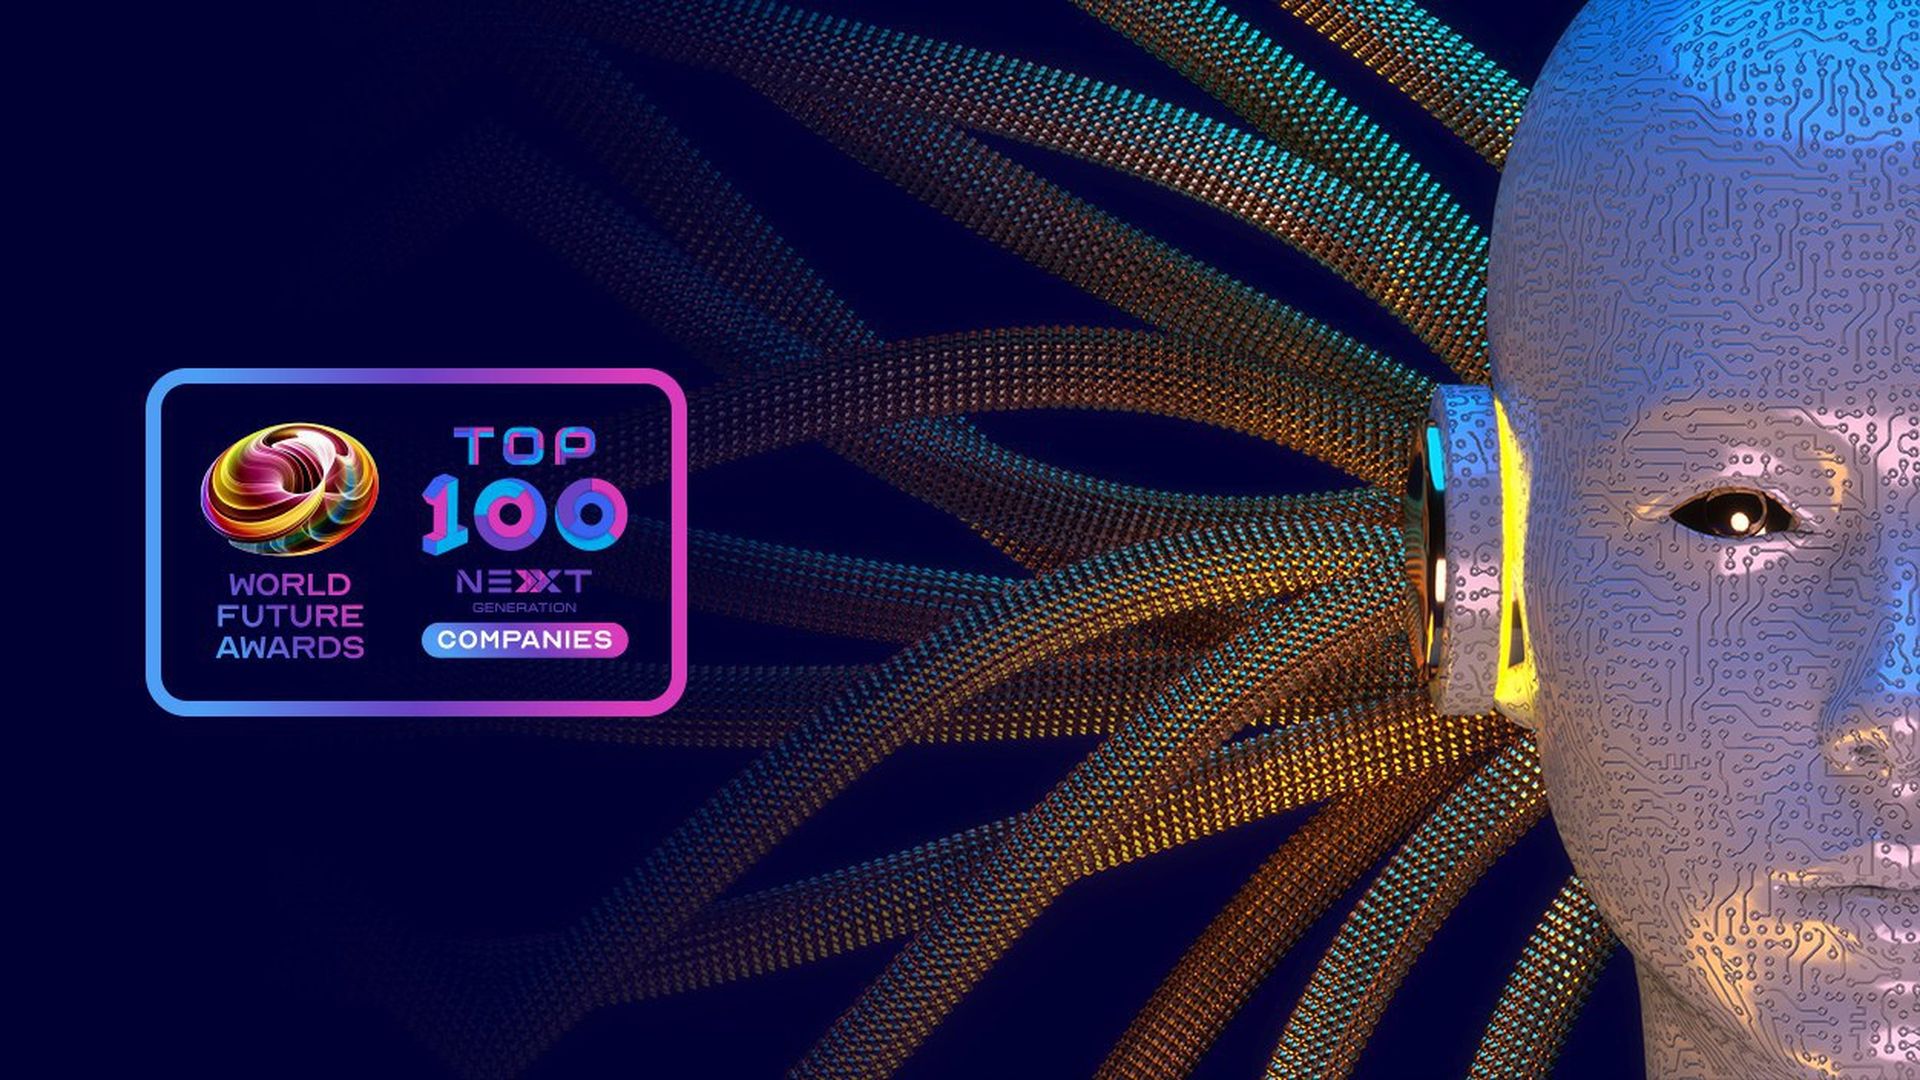 The Top 100 Next Generation Companies 2023: World Future Awards reveals the year's best innovators list